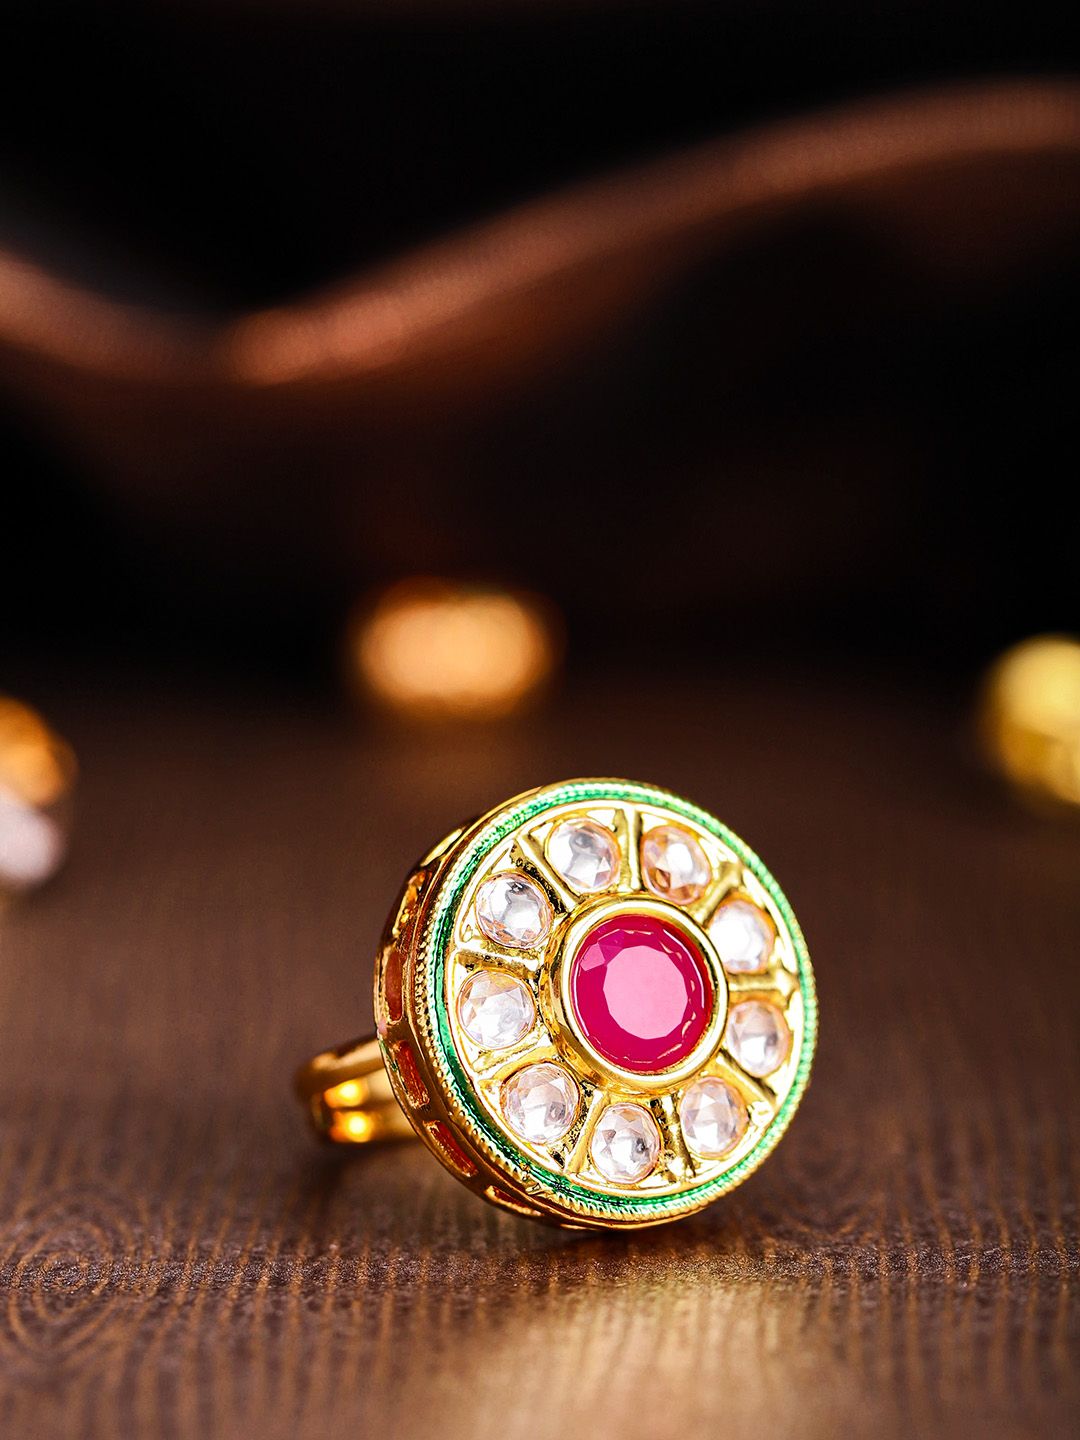 Priyaasi Red Gold-Plated Kundan-Studded Handcrafted Circular Adjustable Finger Ring Price in India